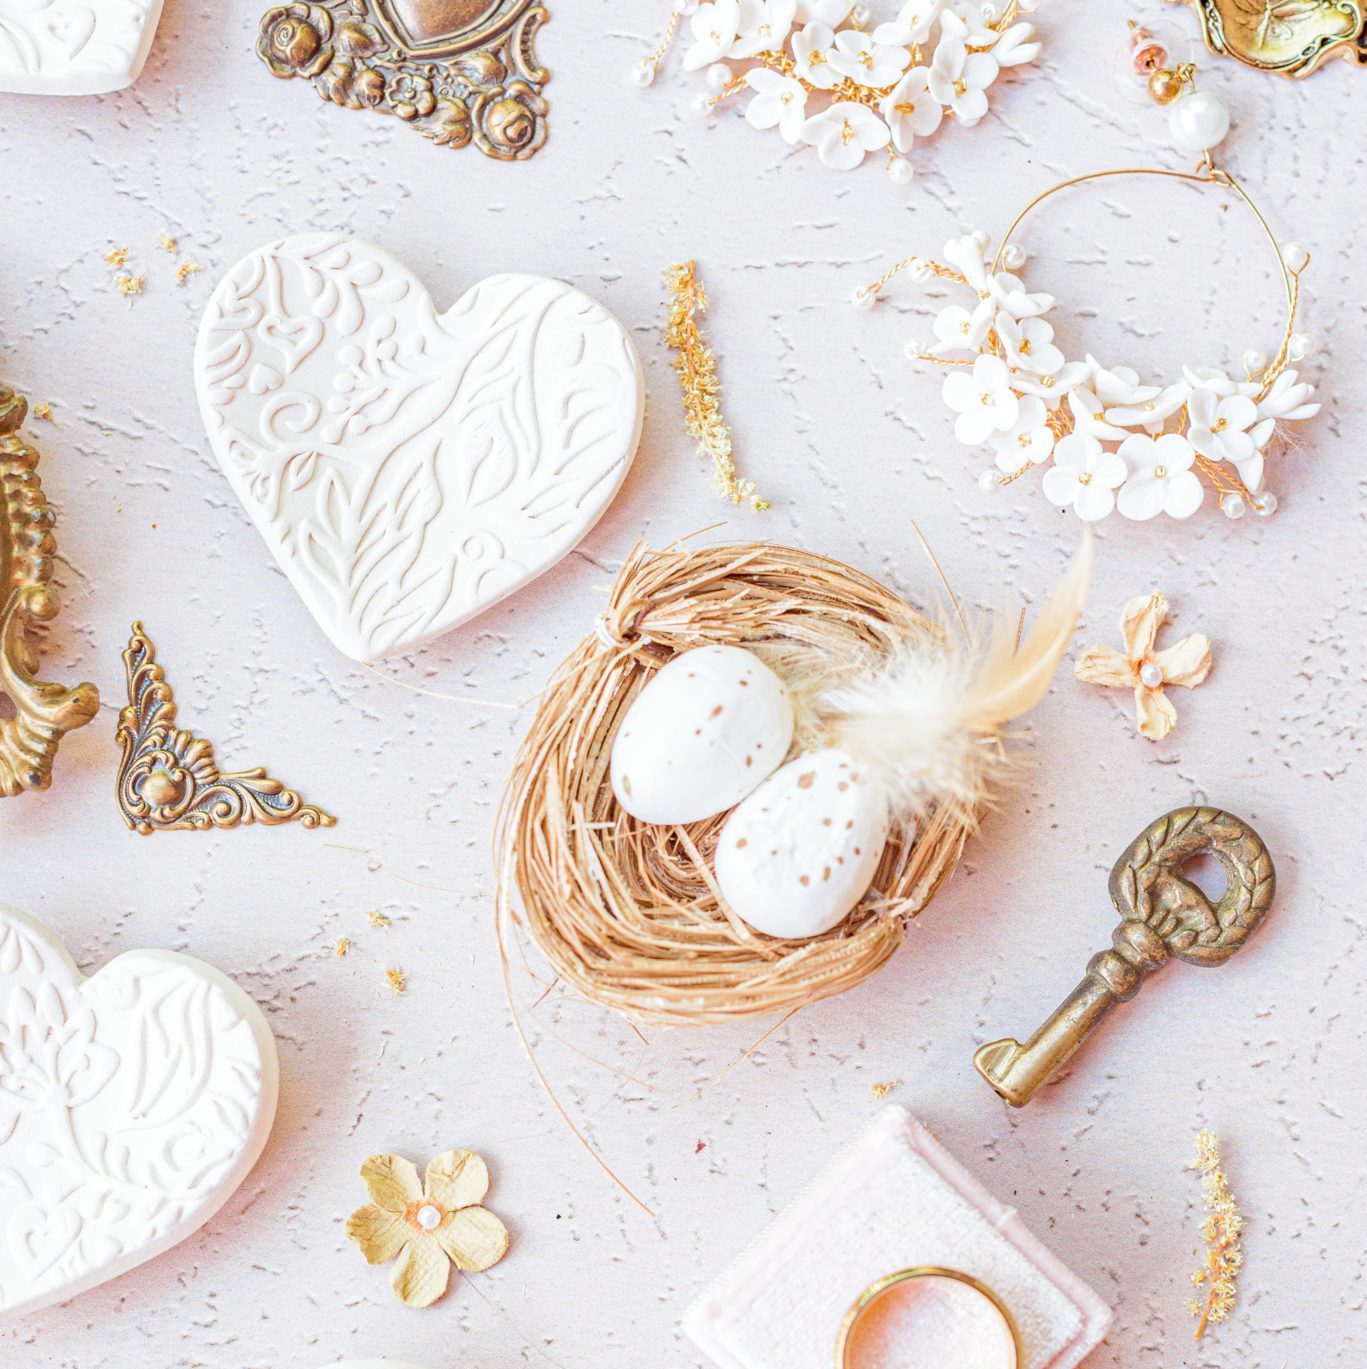 Photos of your wedding invites can include small trinkets, like this tiny bird's nest and vintage key.